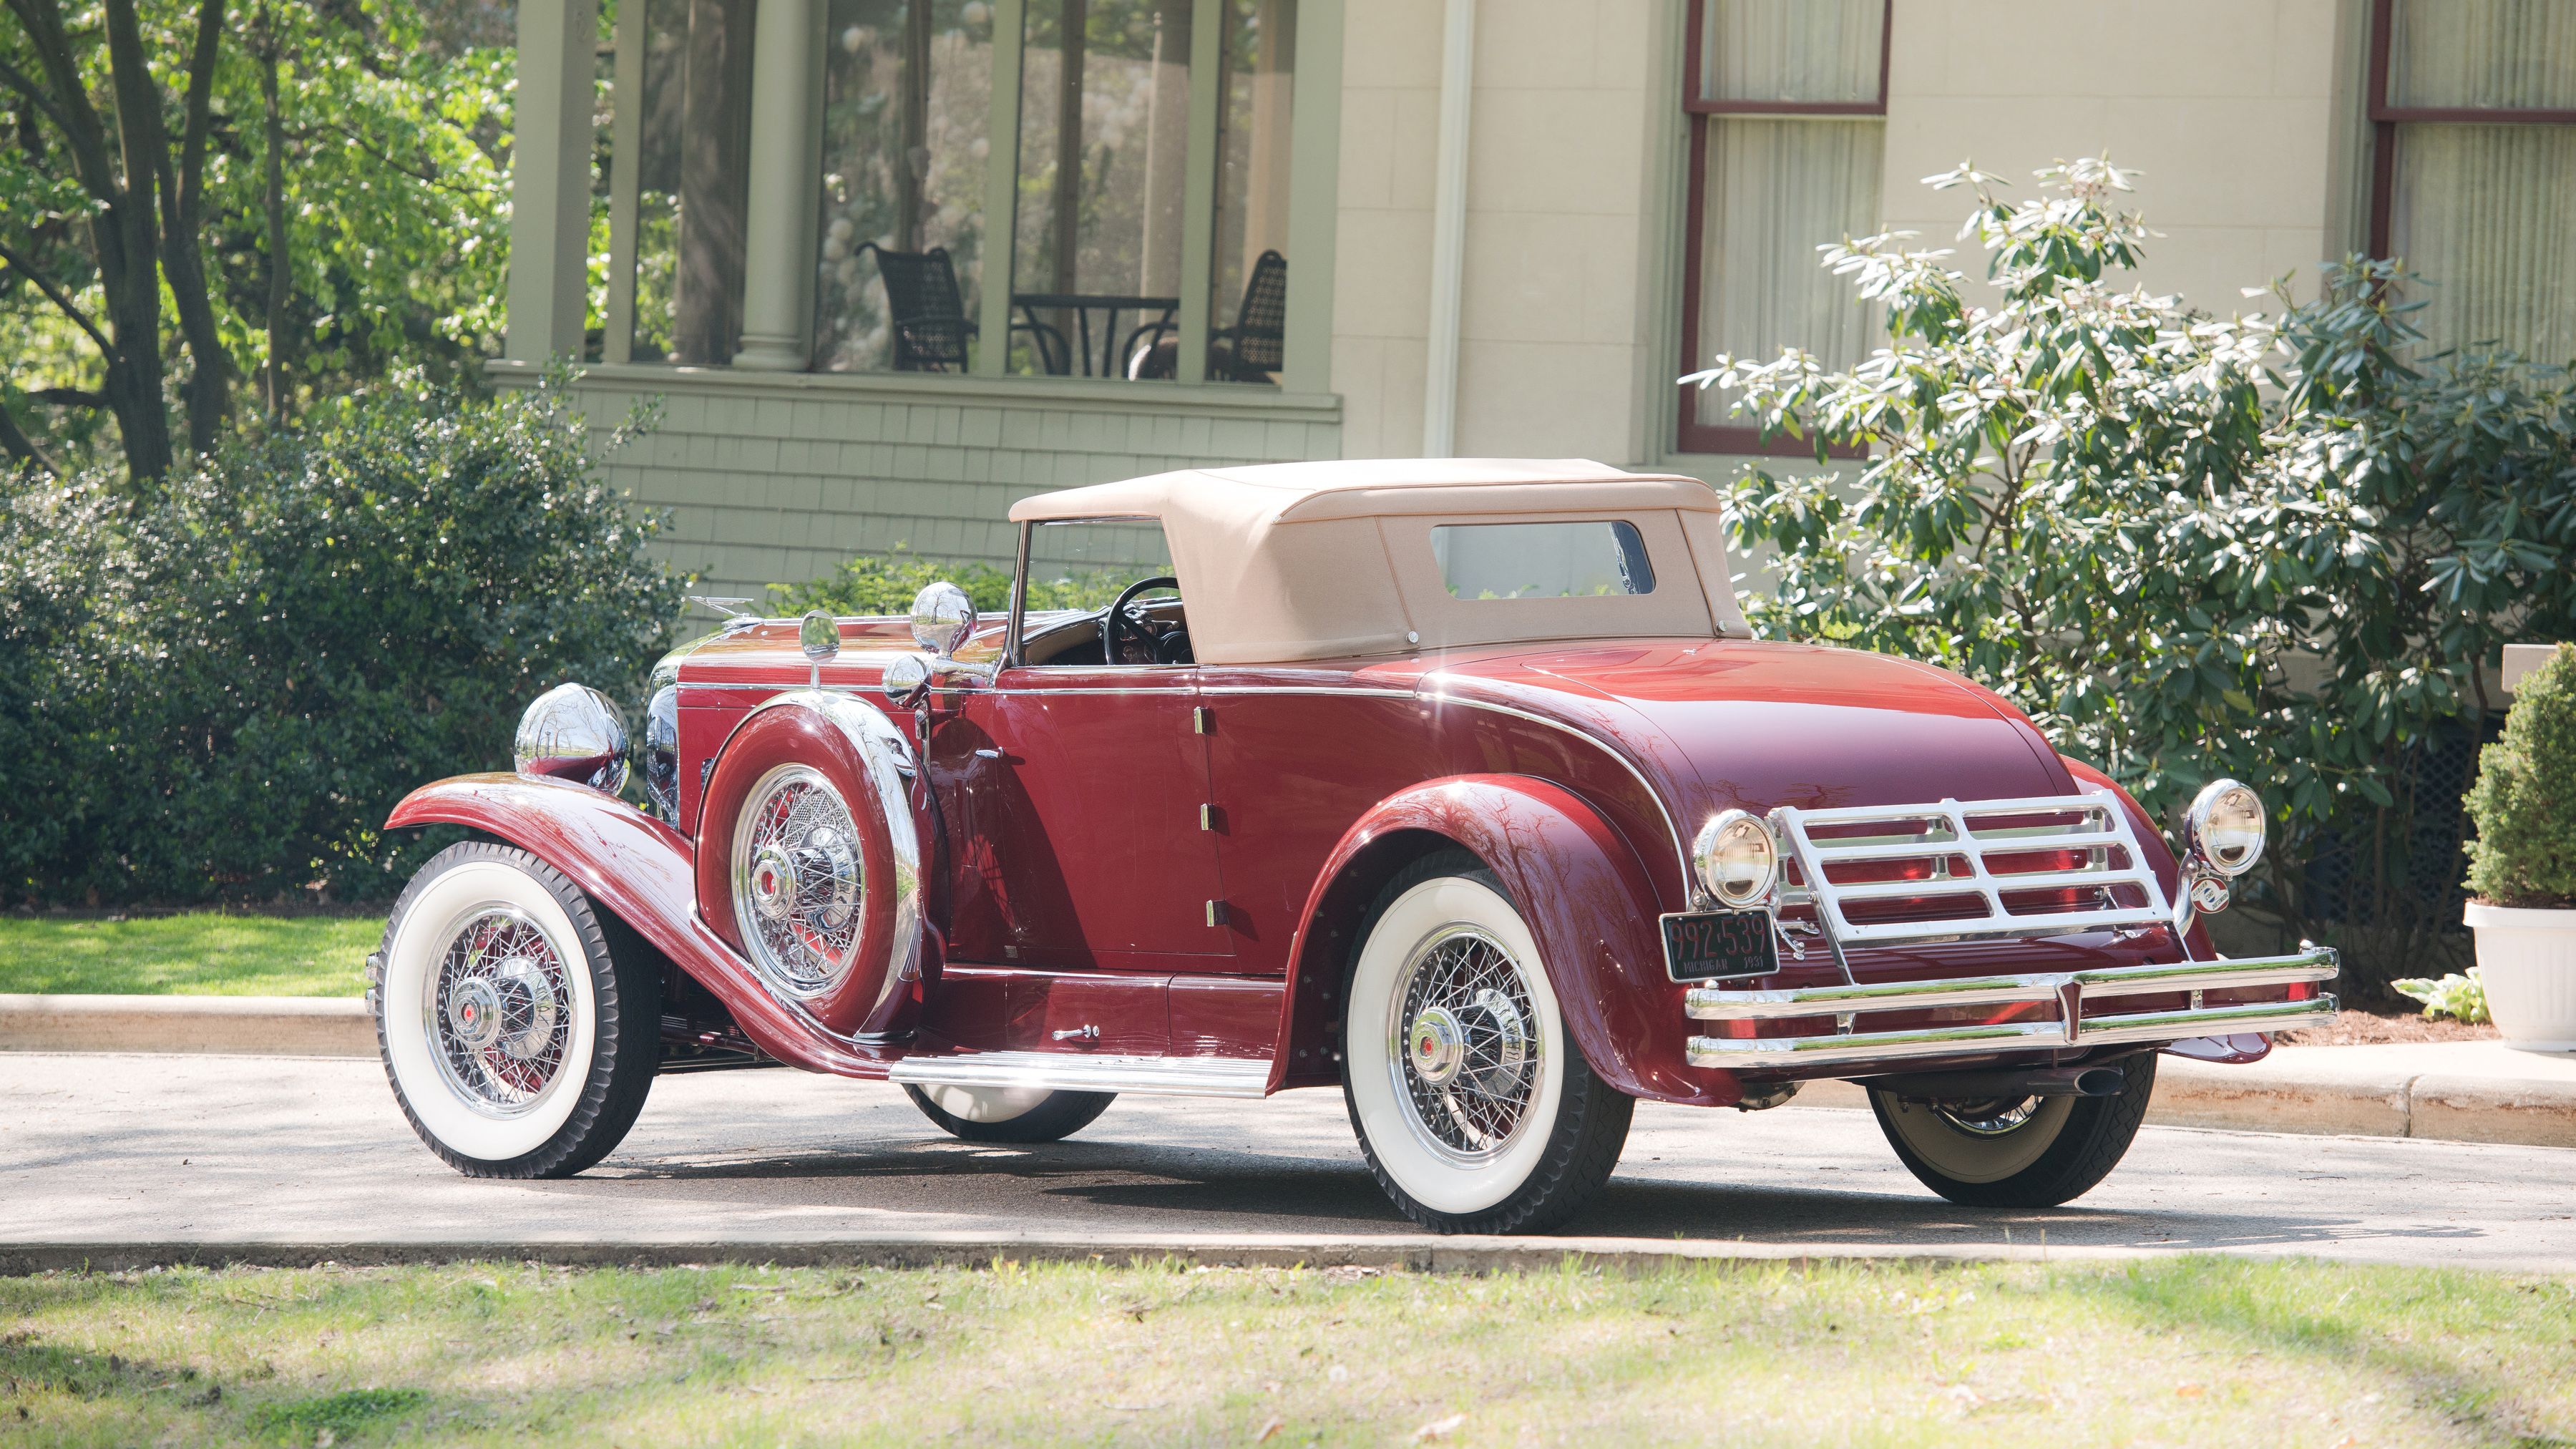 Duesenberg Model Sj Convertible Coupe By Murphy Full Size Car Vintage Car Old Car 3600x2025